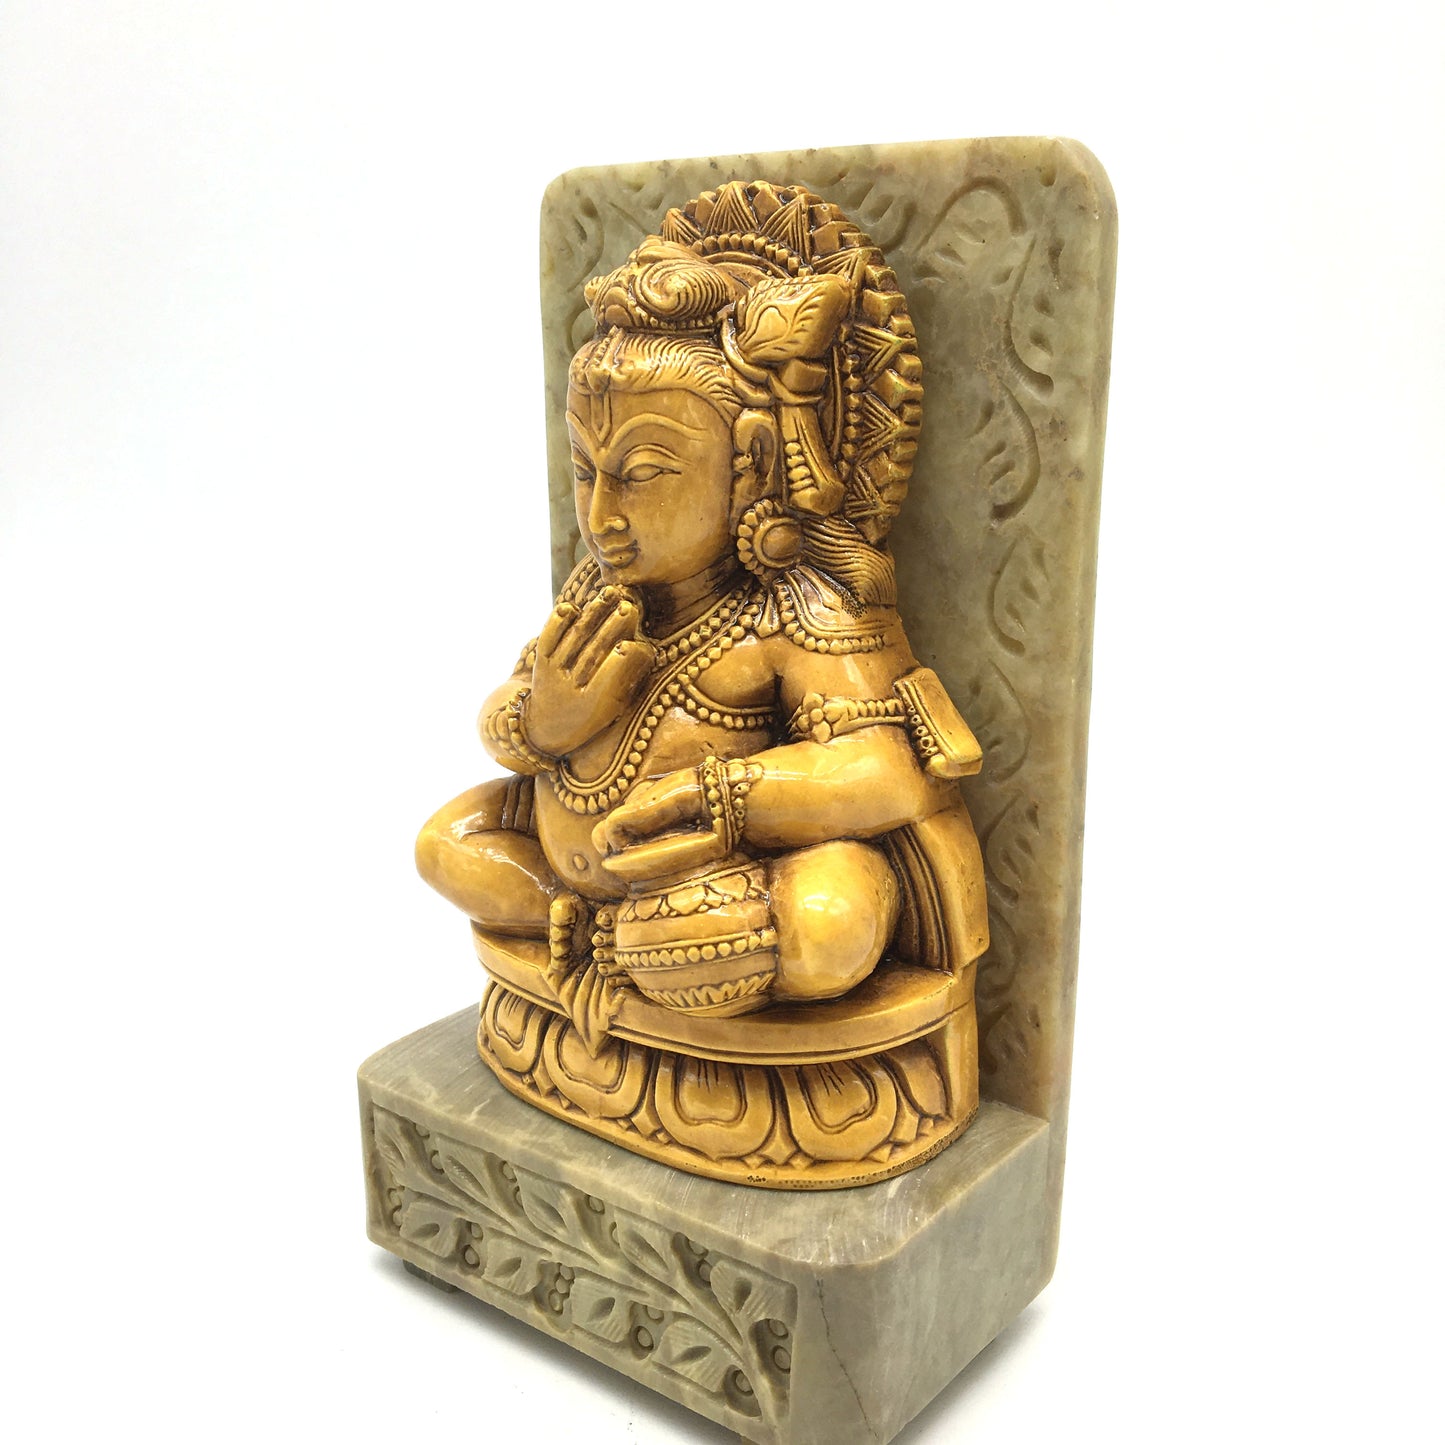 India God Krishna The Butter Thief on Resin and Soapstone Base Statue Handmade